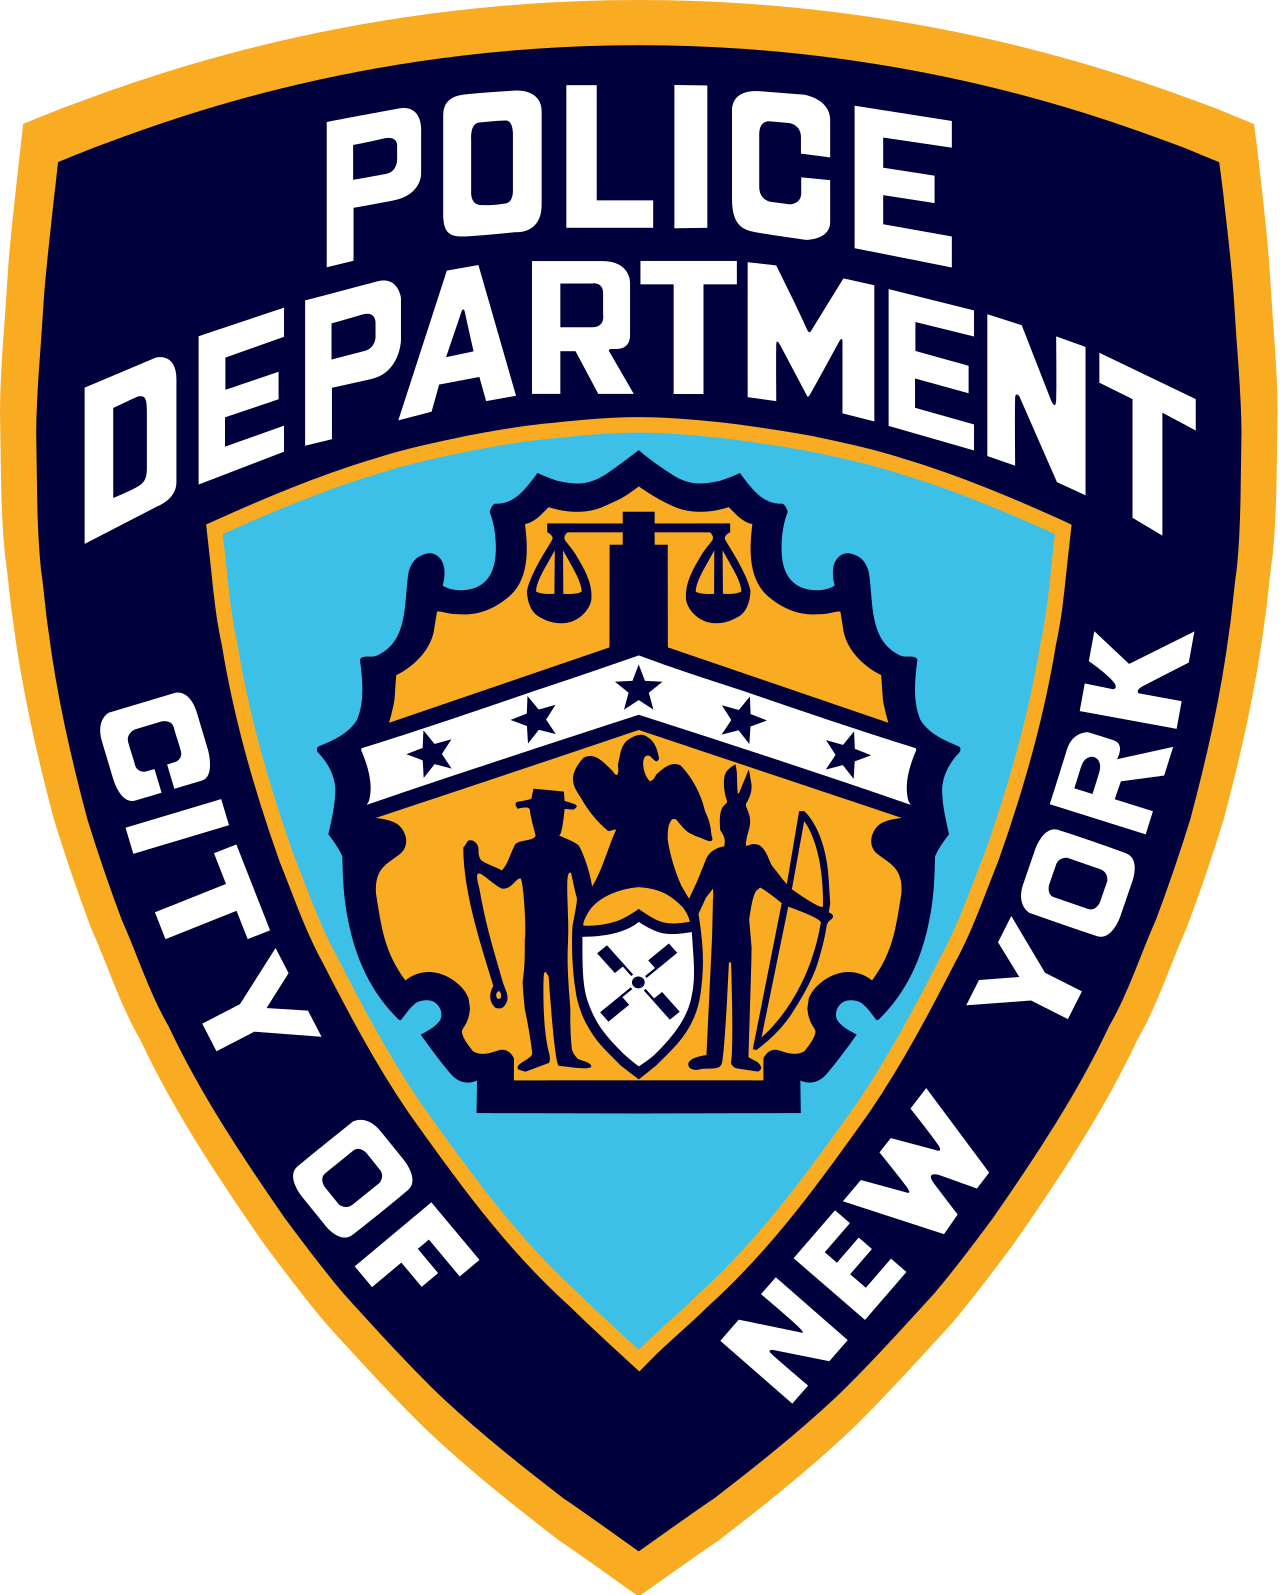 CLASS ACTION SUIT FILED AGAINST NYPD FOR DENIAL OF SECOND AMENDMENT